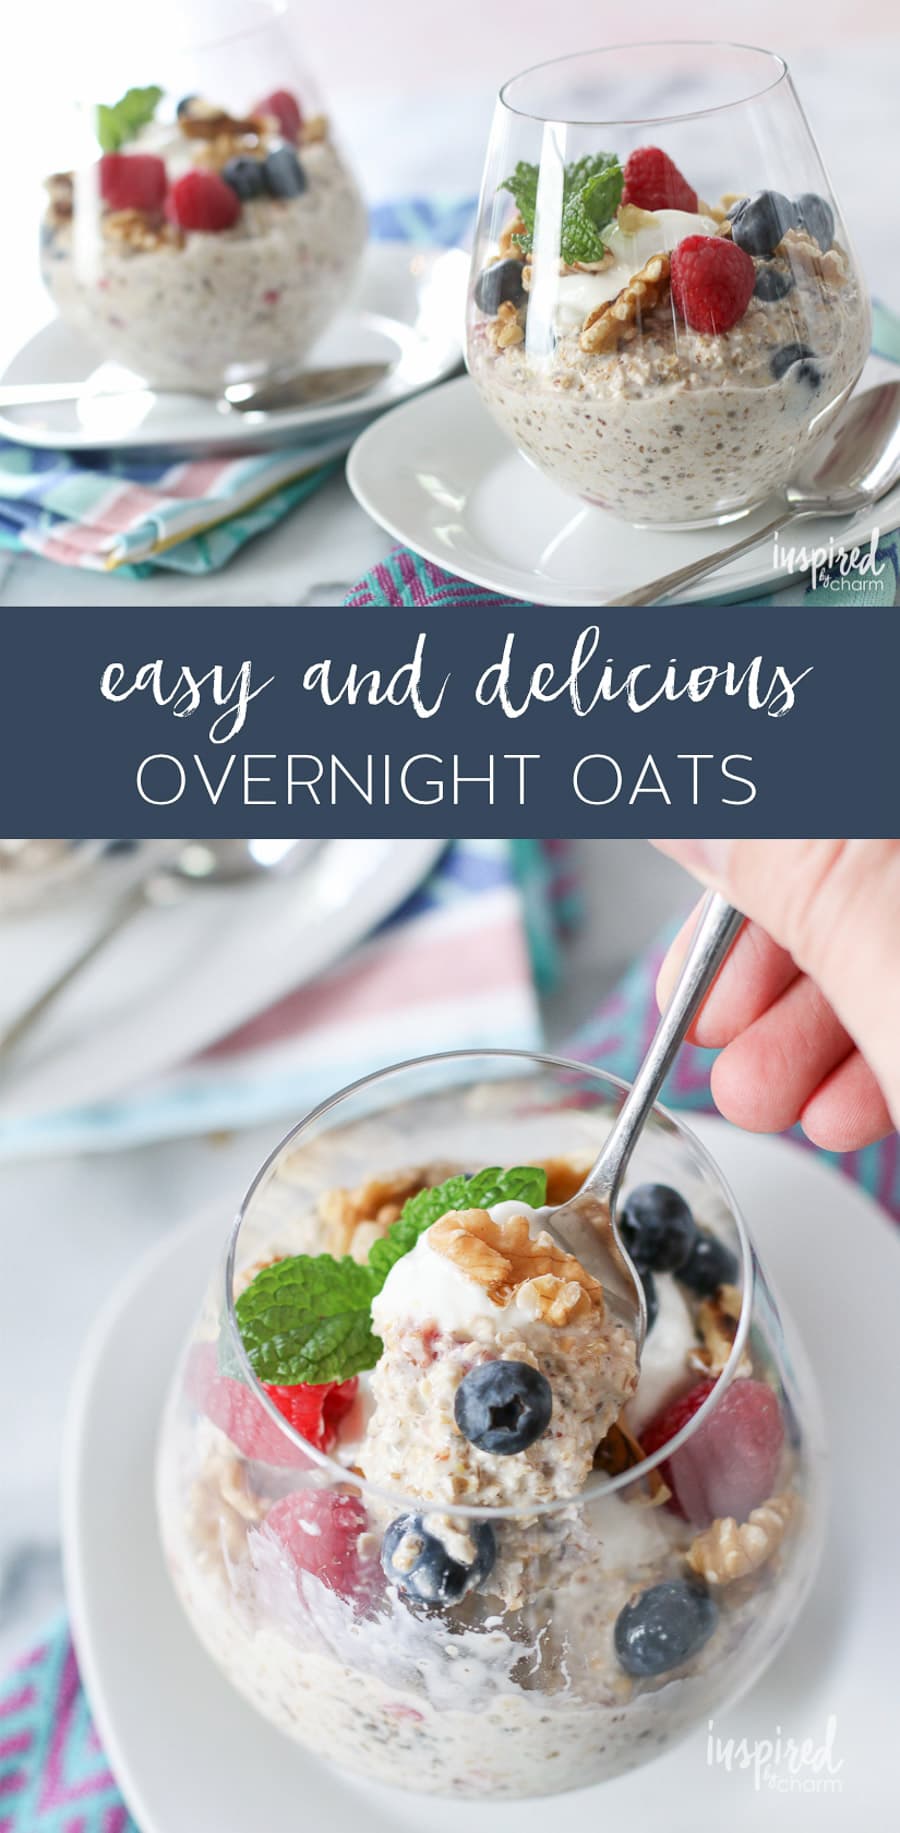 Easy and Delicious Overnight Oats Recipe #overnightoats #oatmeal #berries #breakfast #recipe